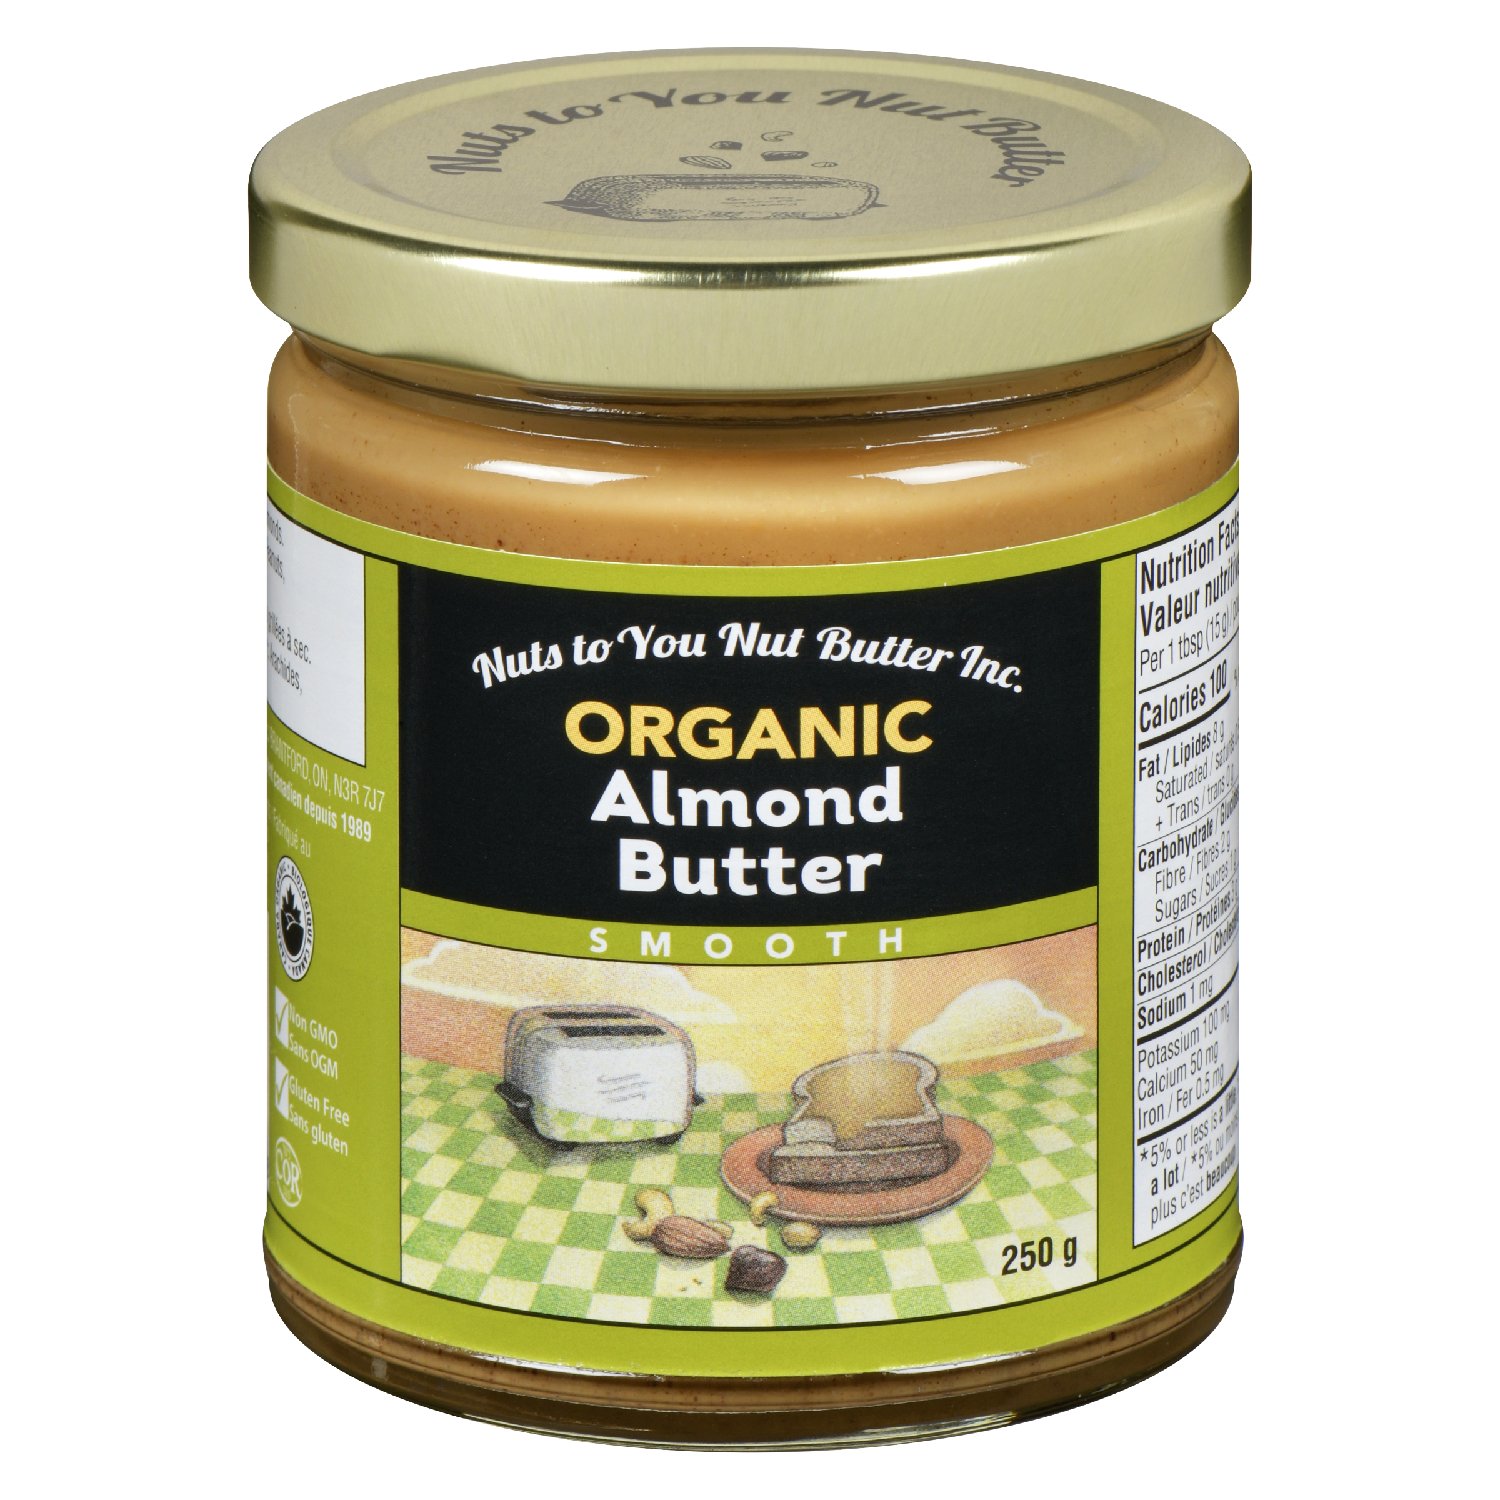 Organic Almond Butter Smooth — Nuts to You Nut Butter